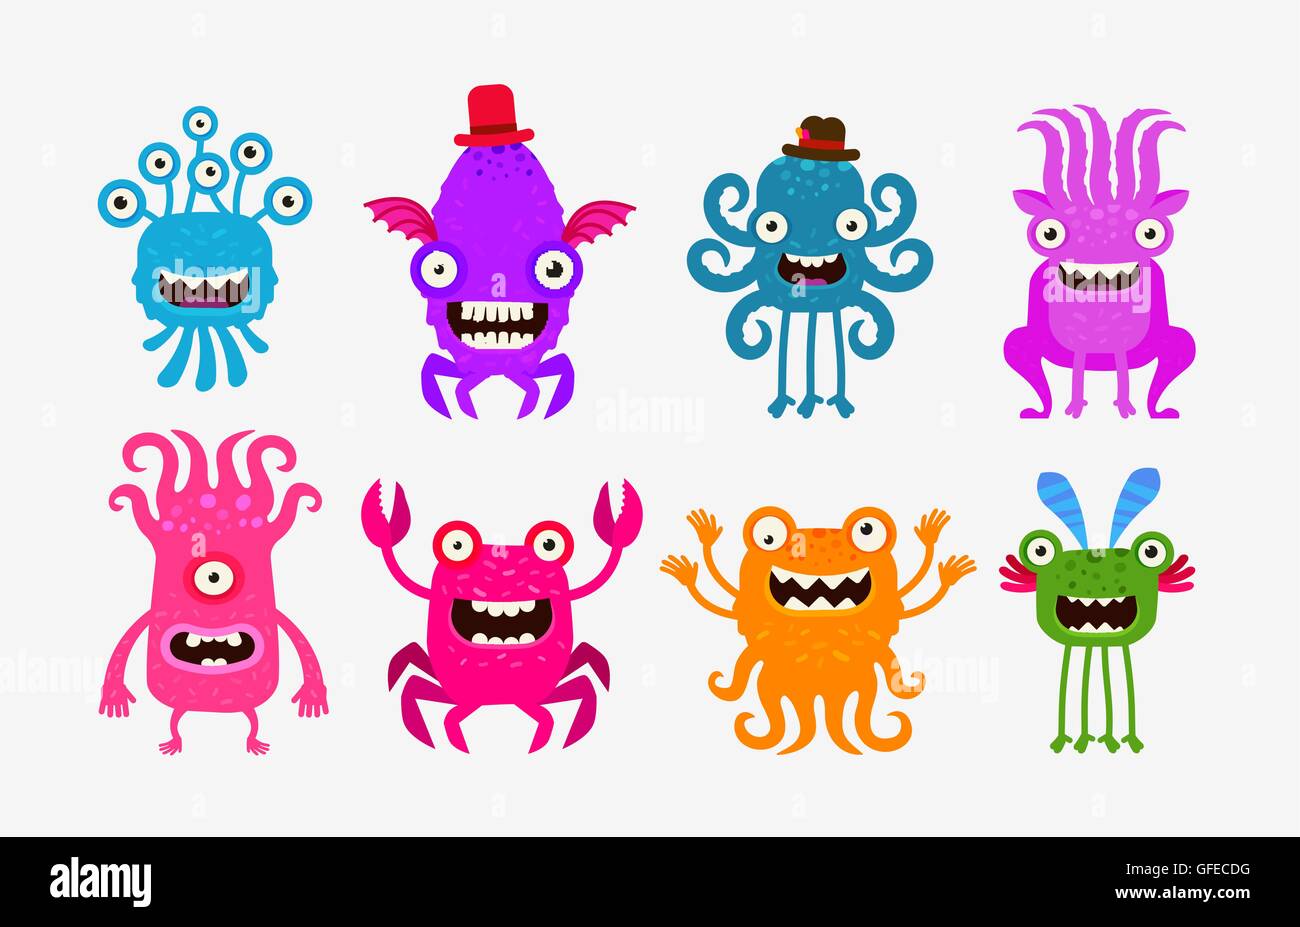 Set of cheerful and terrible monsters, ghosts, aliens. Vector illustration Stock Vector